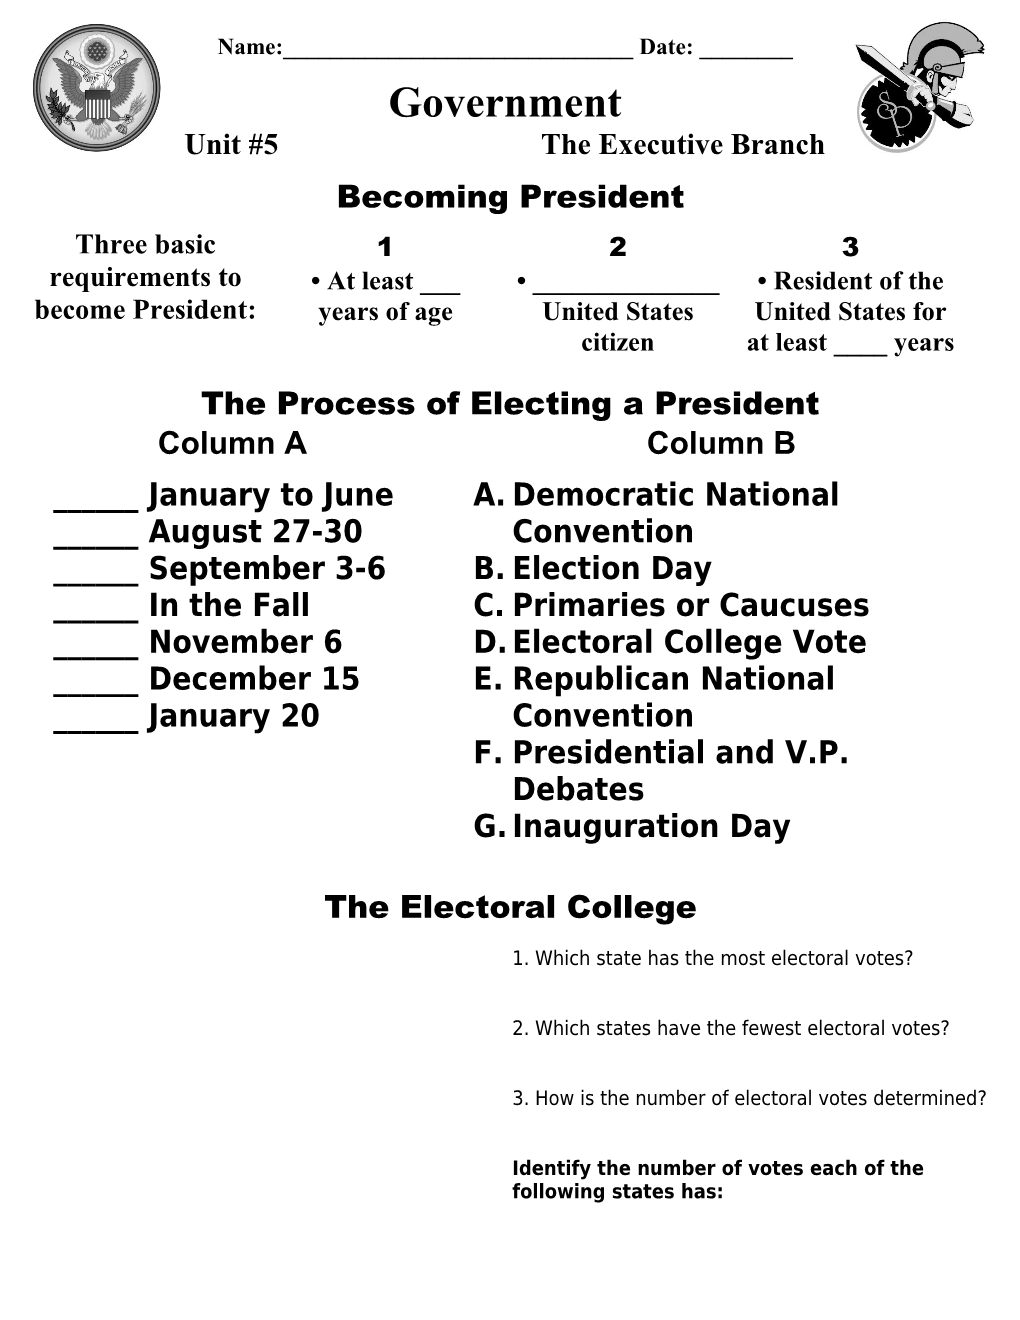 The Process of Electing a President